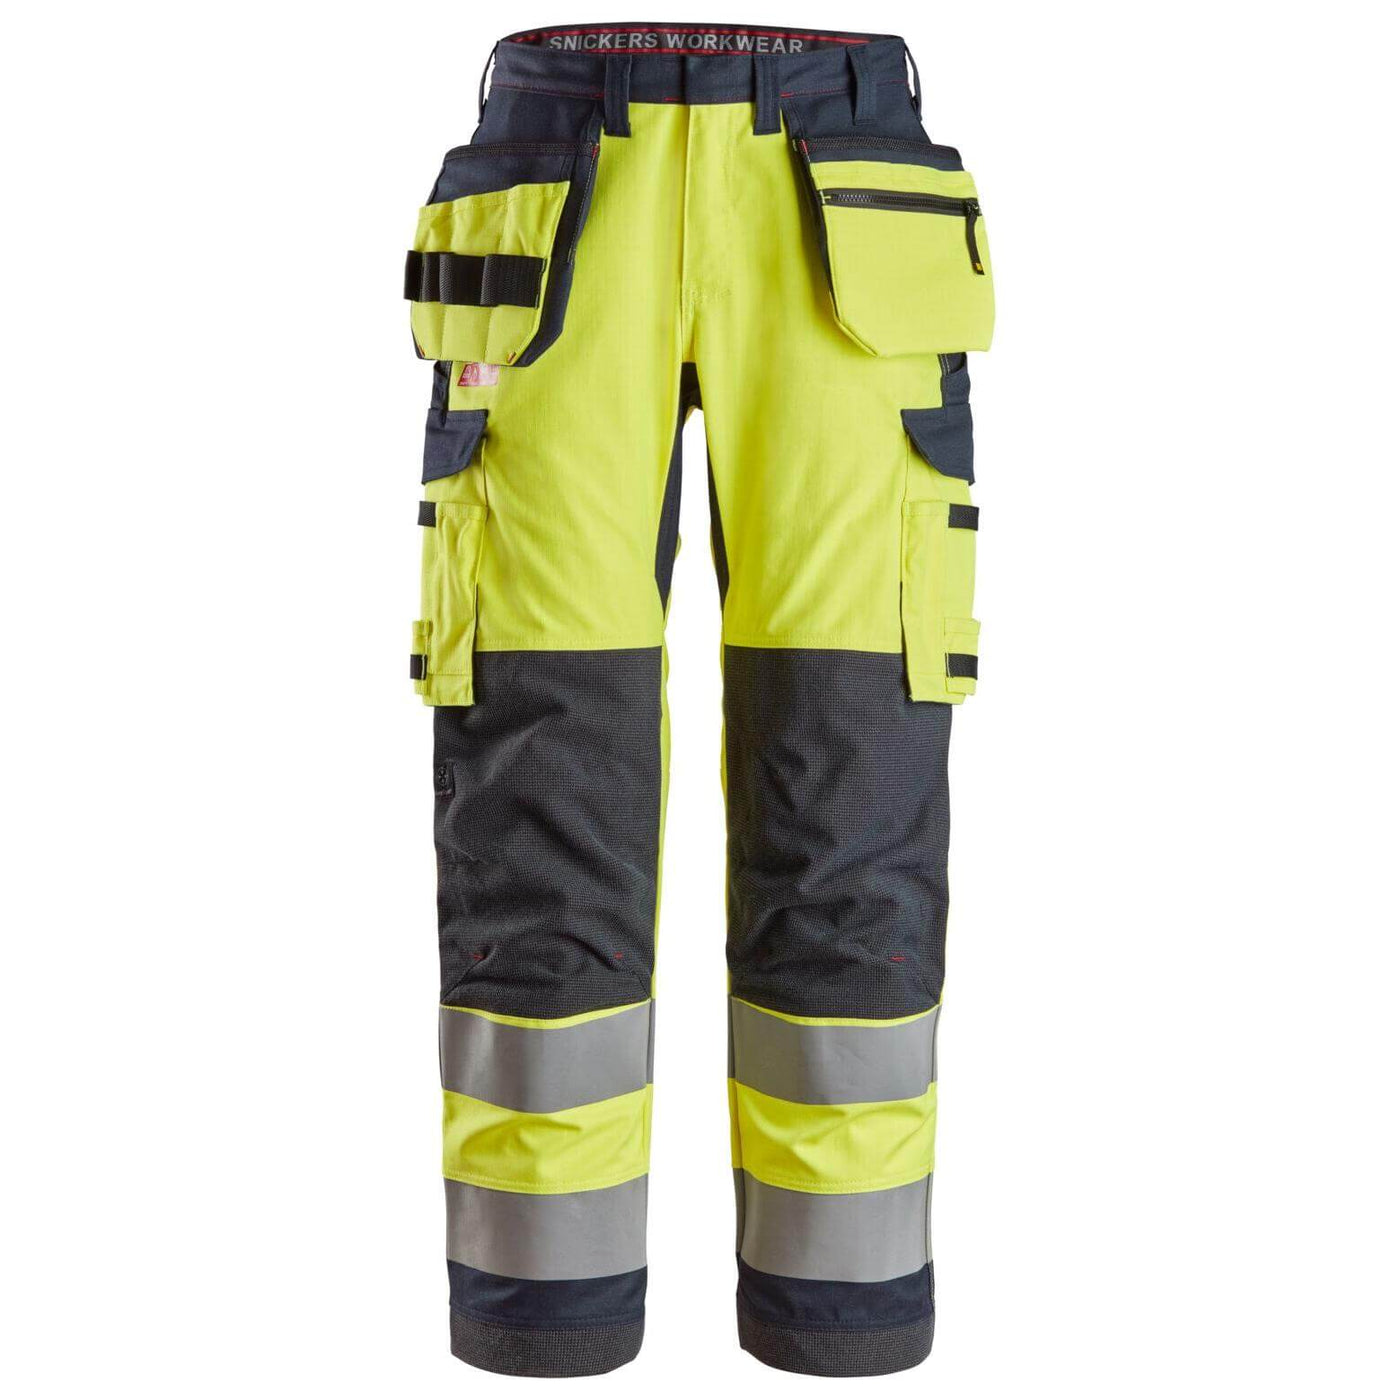 Snickers 6261 ProtecWork Hi Vis Work Trousers with Holster Pockets and Equal Leg Pockets Class 2 Hi Vis Yellow Navy Blue 3710009 #colour_hi-vis-yellow-navy-blue